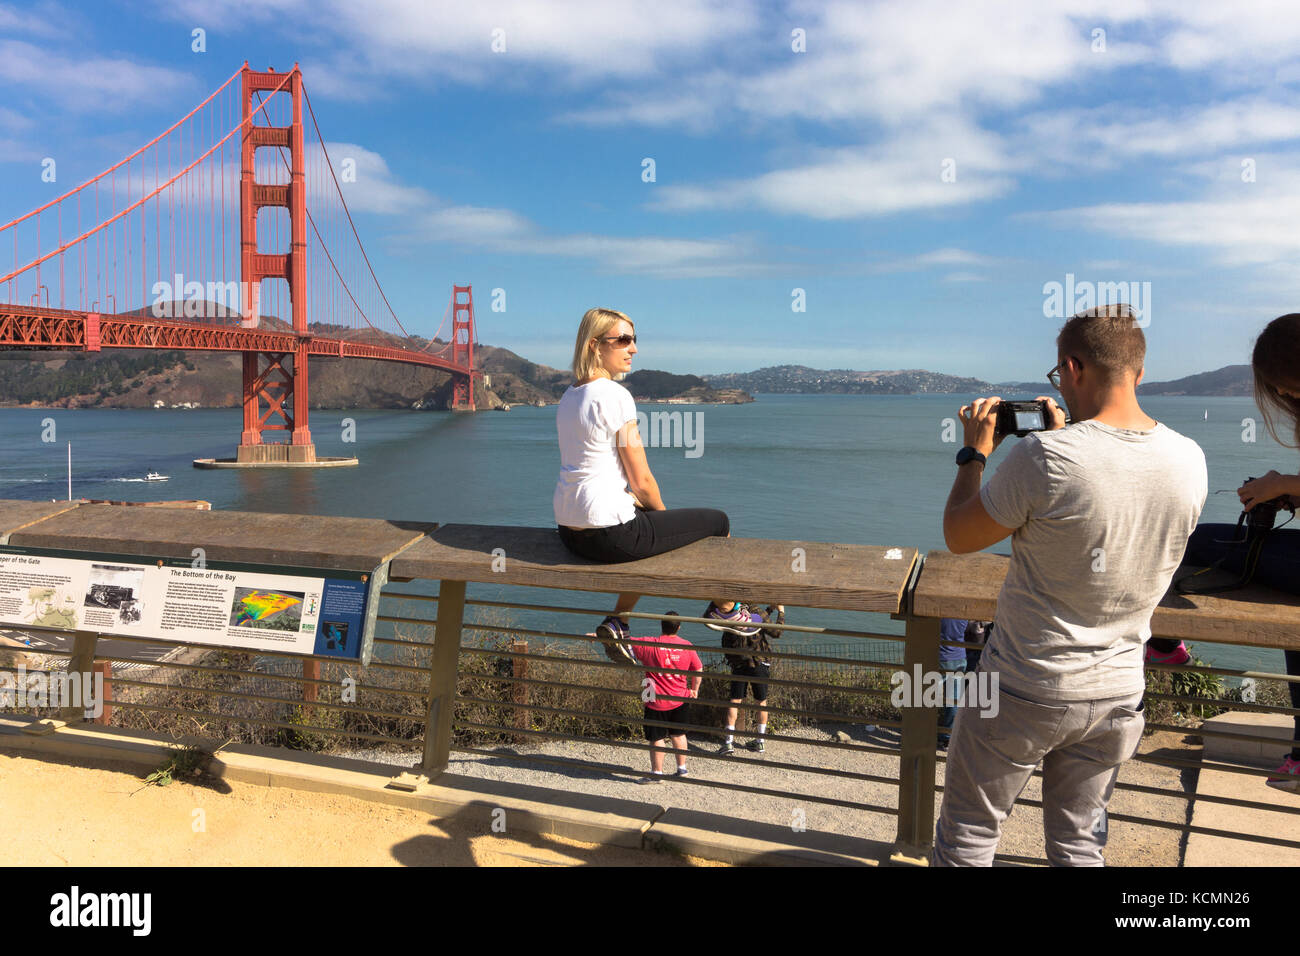 San Francisco, California, USA - September 15th, 2017: A young man is taking a photo of a blonde woman at the Golden Gate National Recreation Area. Stock Photo